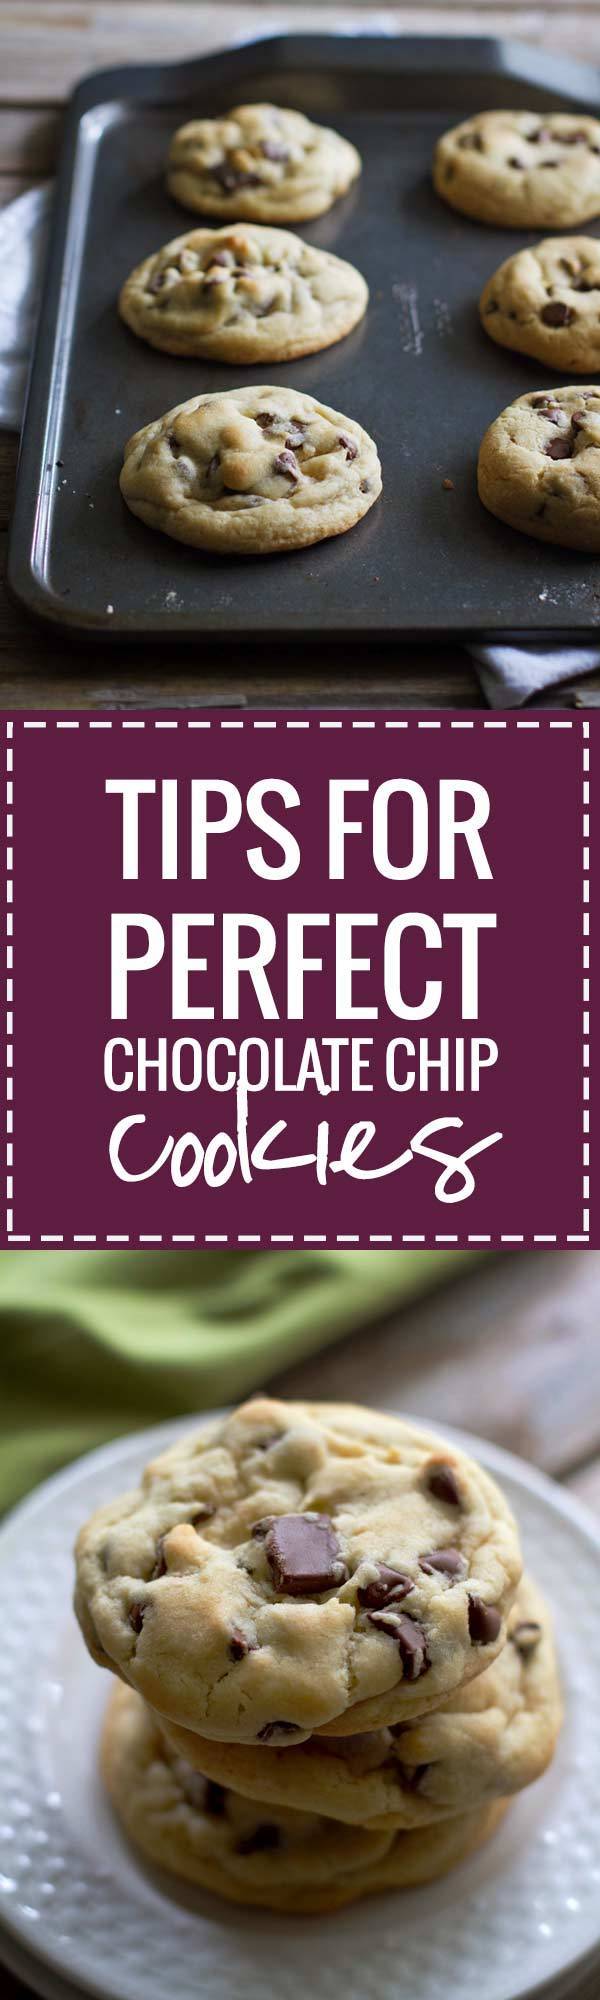 Here are my simple tips for perfect chocolate chip cookies with an easy recipe for my all-time favorite, classic, perfect chocolate chip cookie.